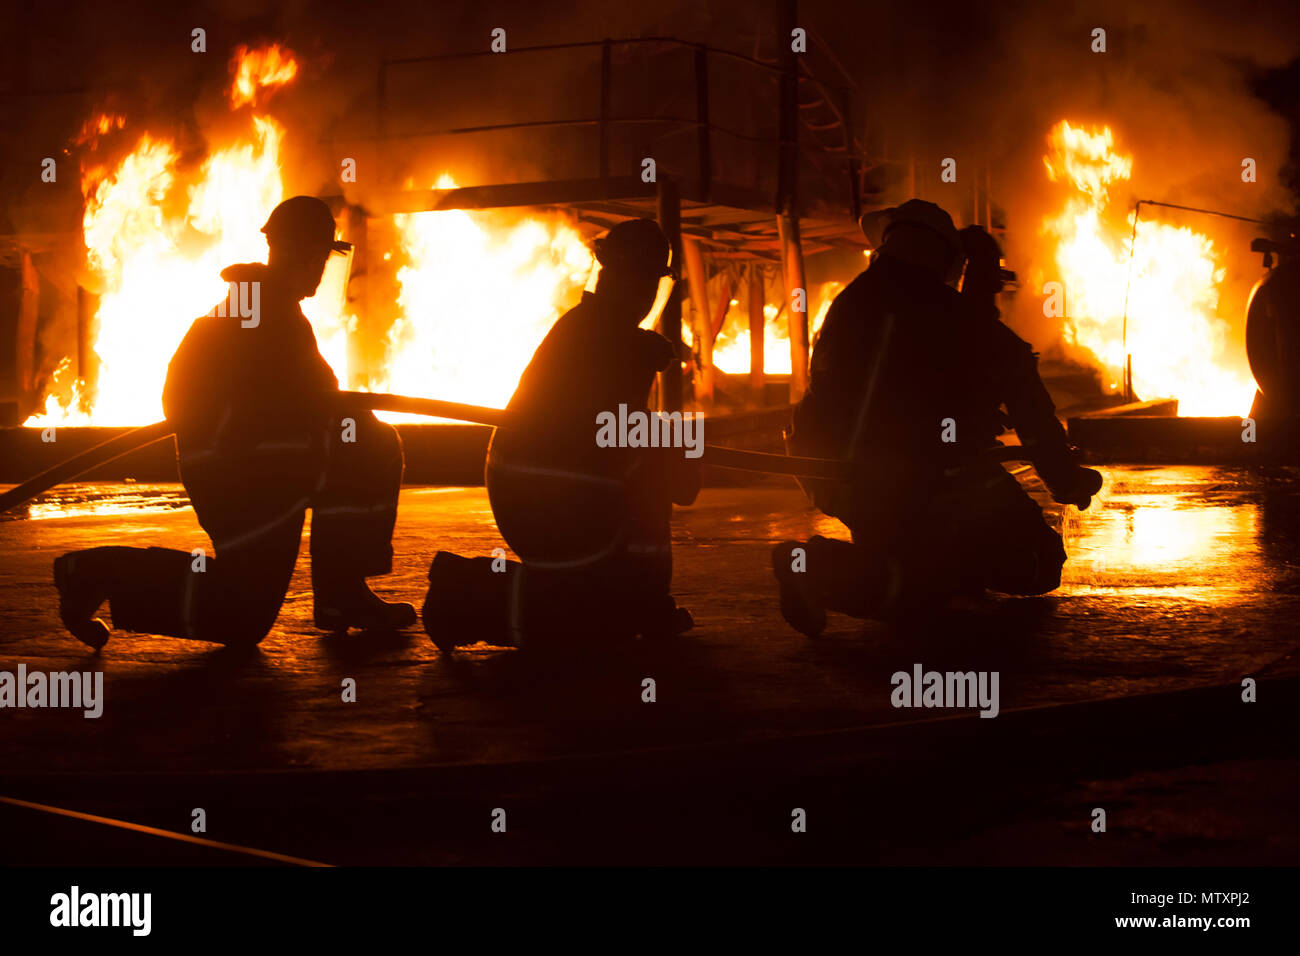 JOHANNESBURG, SOUTH AFRICA - MAY, 2018 Firefighters kneeling during firefighting training exercise Stock Photo